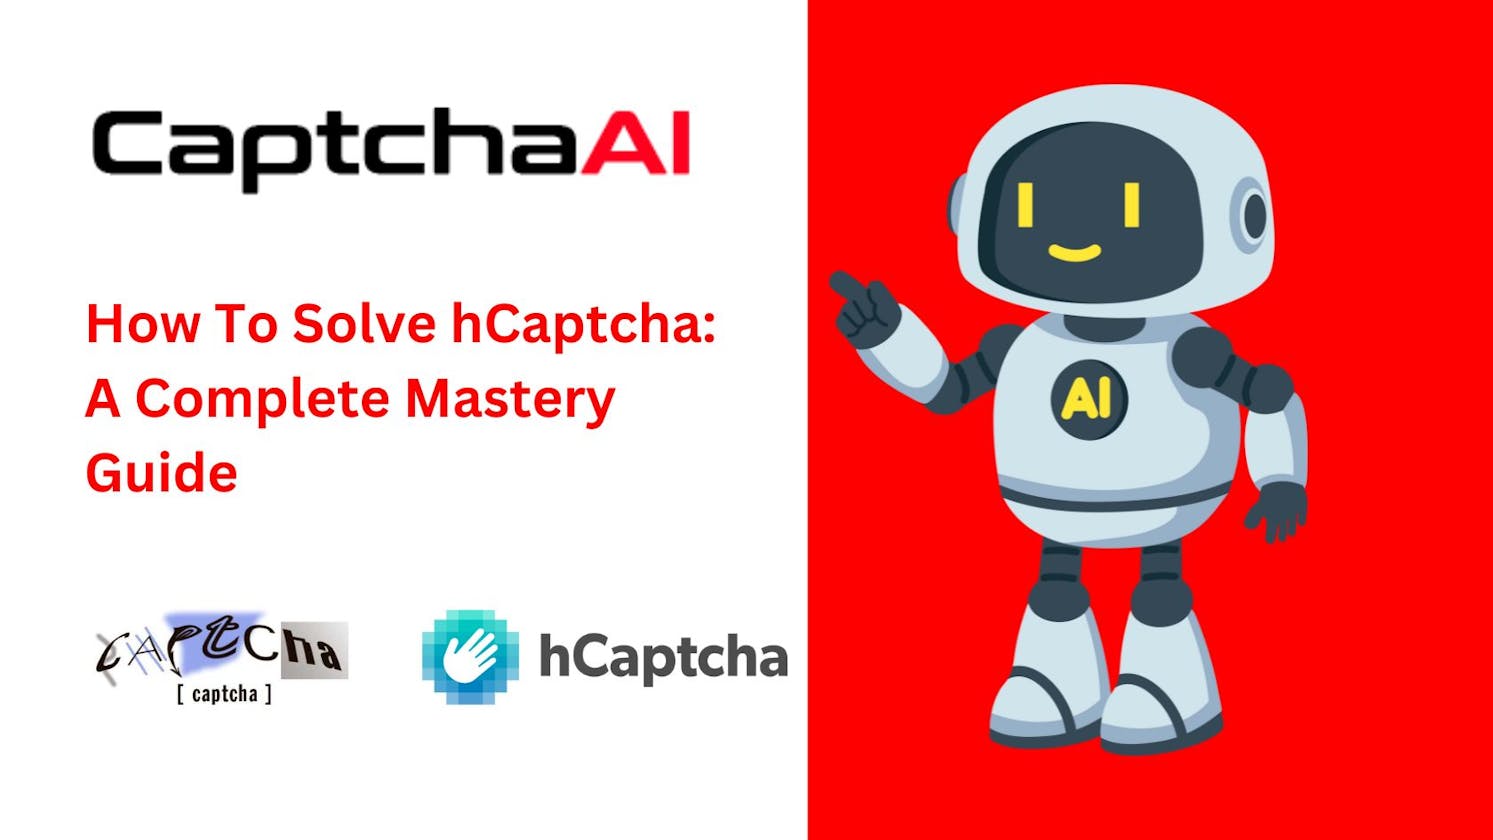 How To Solve hCaptcha: A Complete Mastery Guide